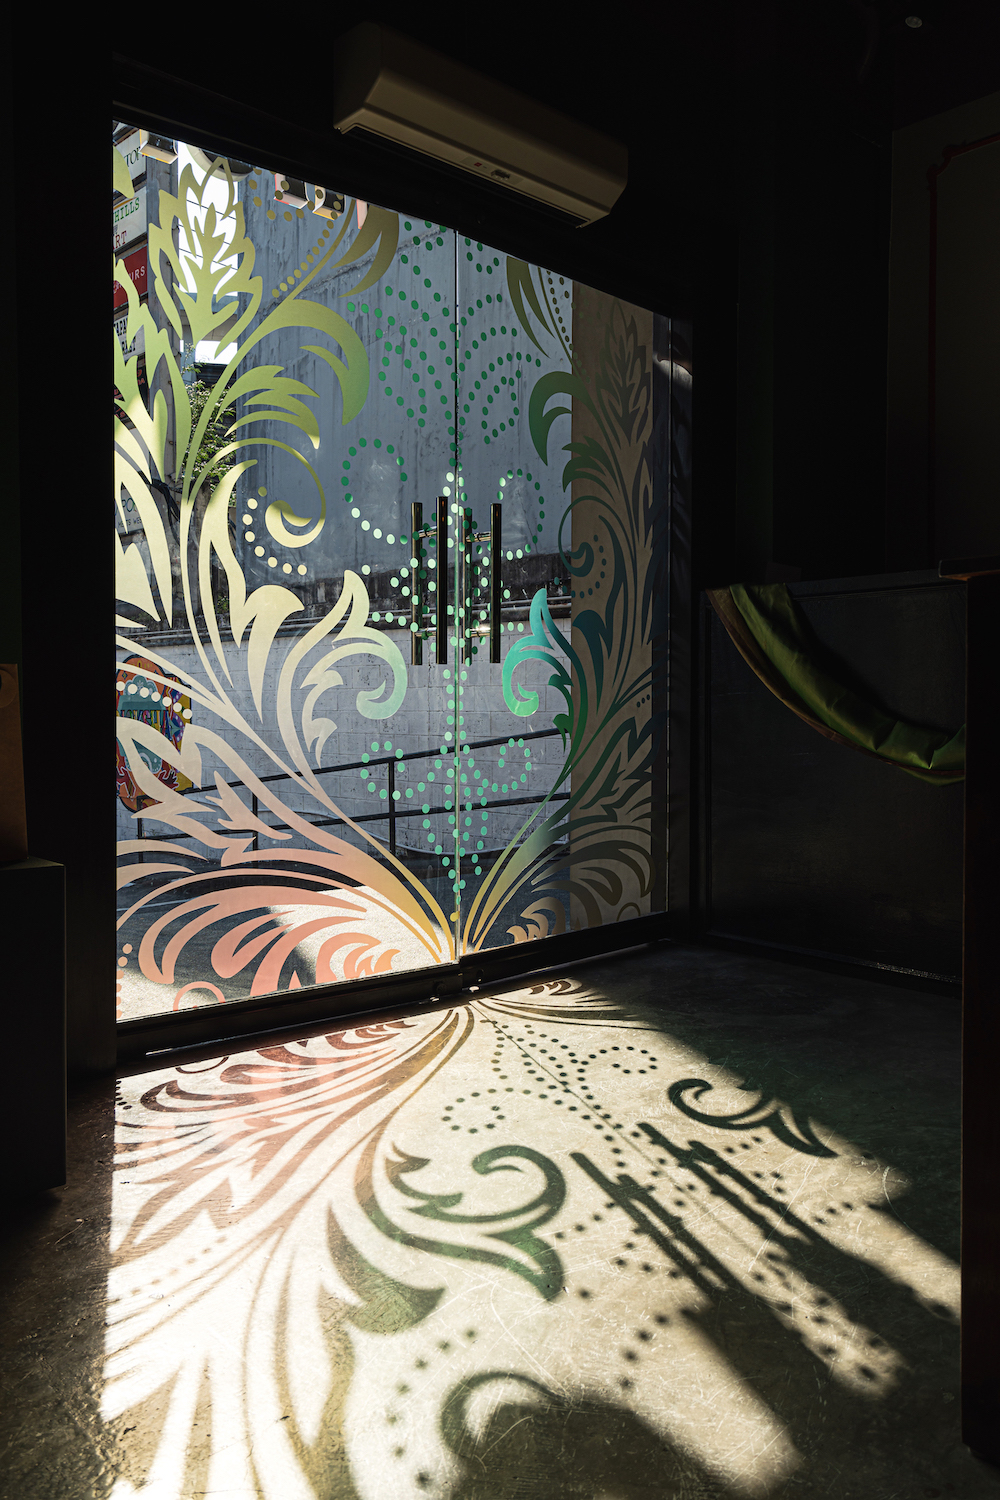 The rangoli design on the glass doors is reflective of the colorful expression customers can expect at Ricksha